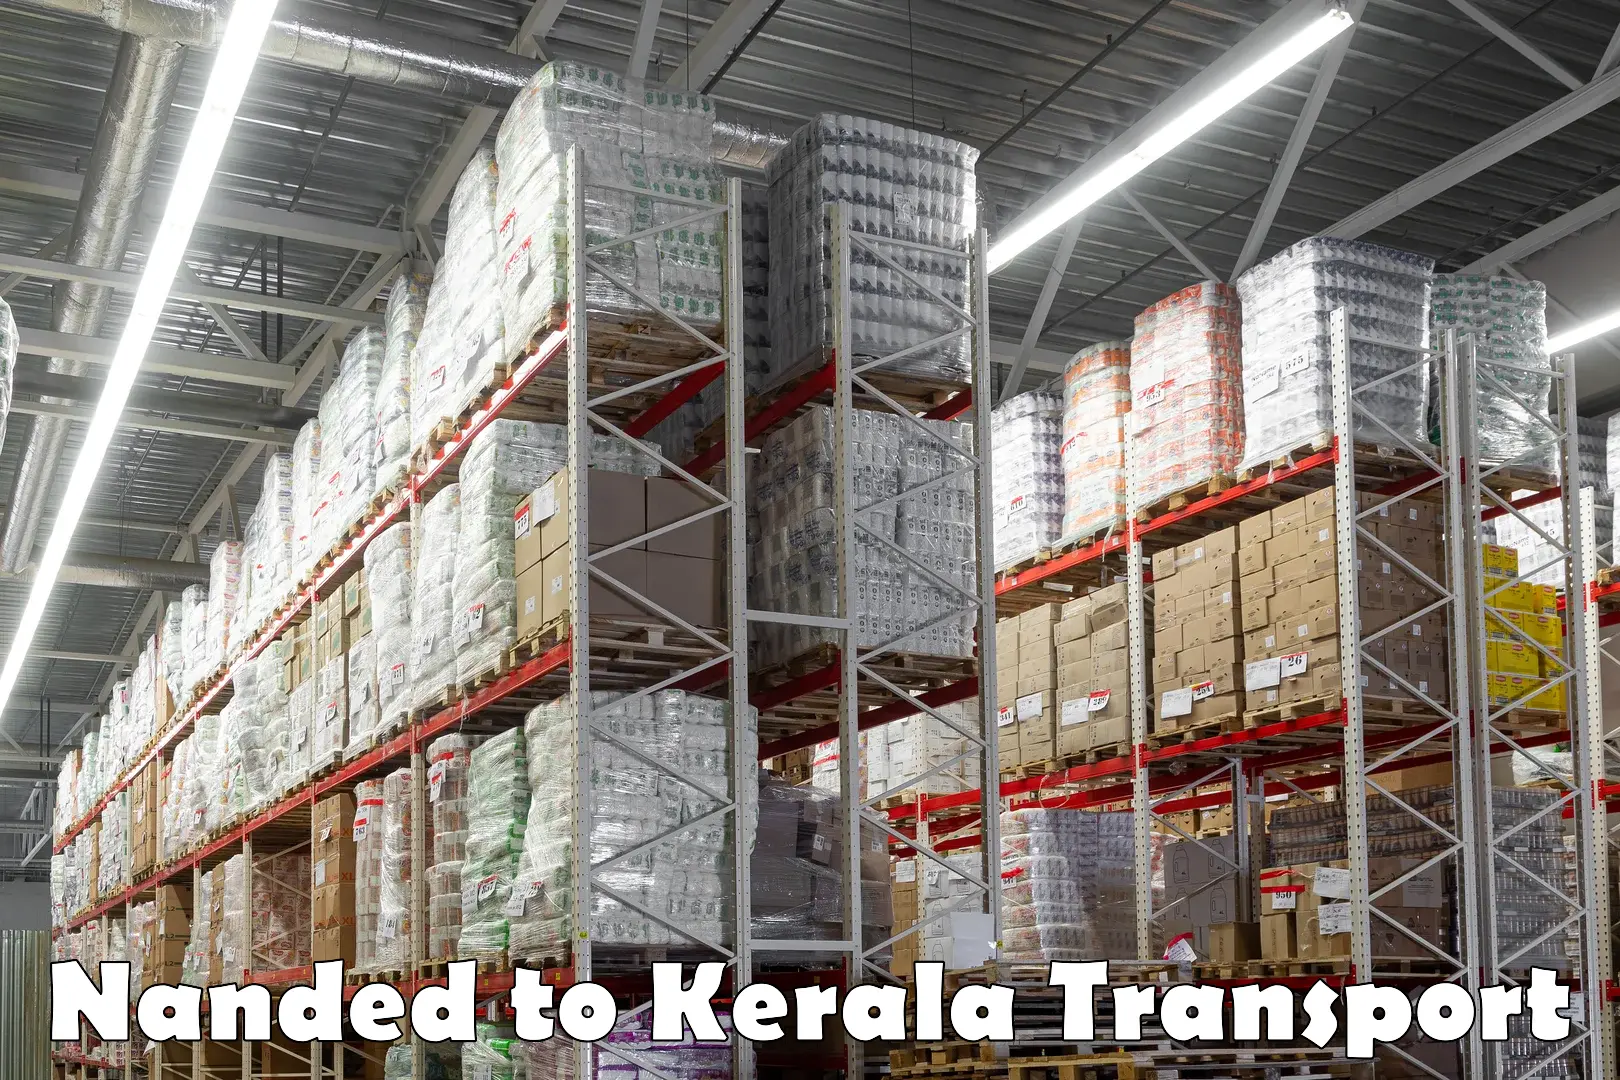 Delivery service Nanded to Kerala